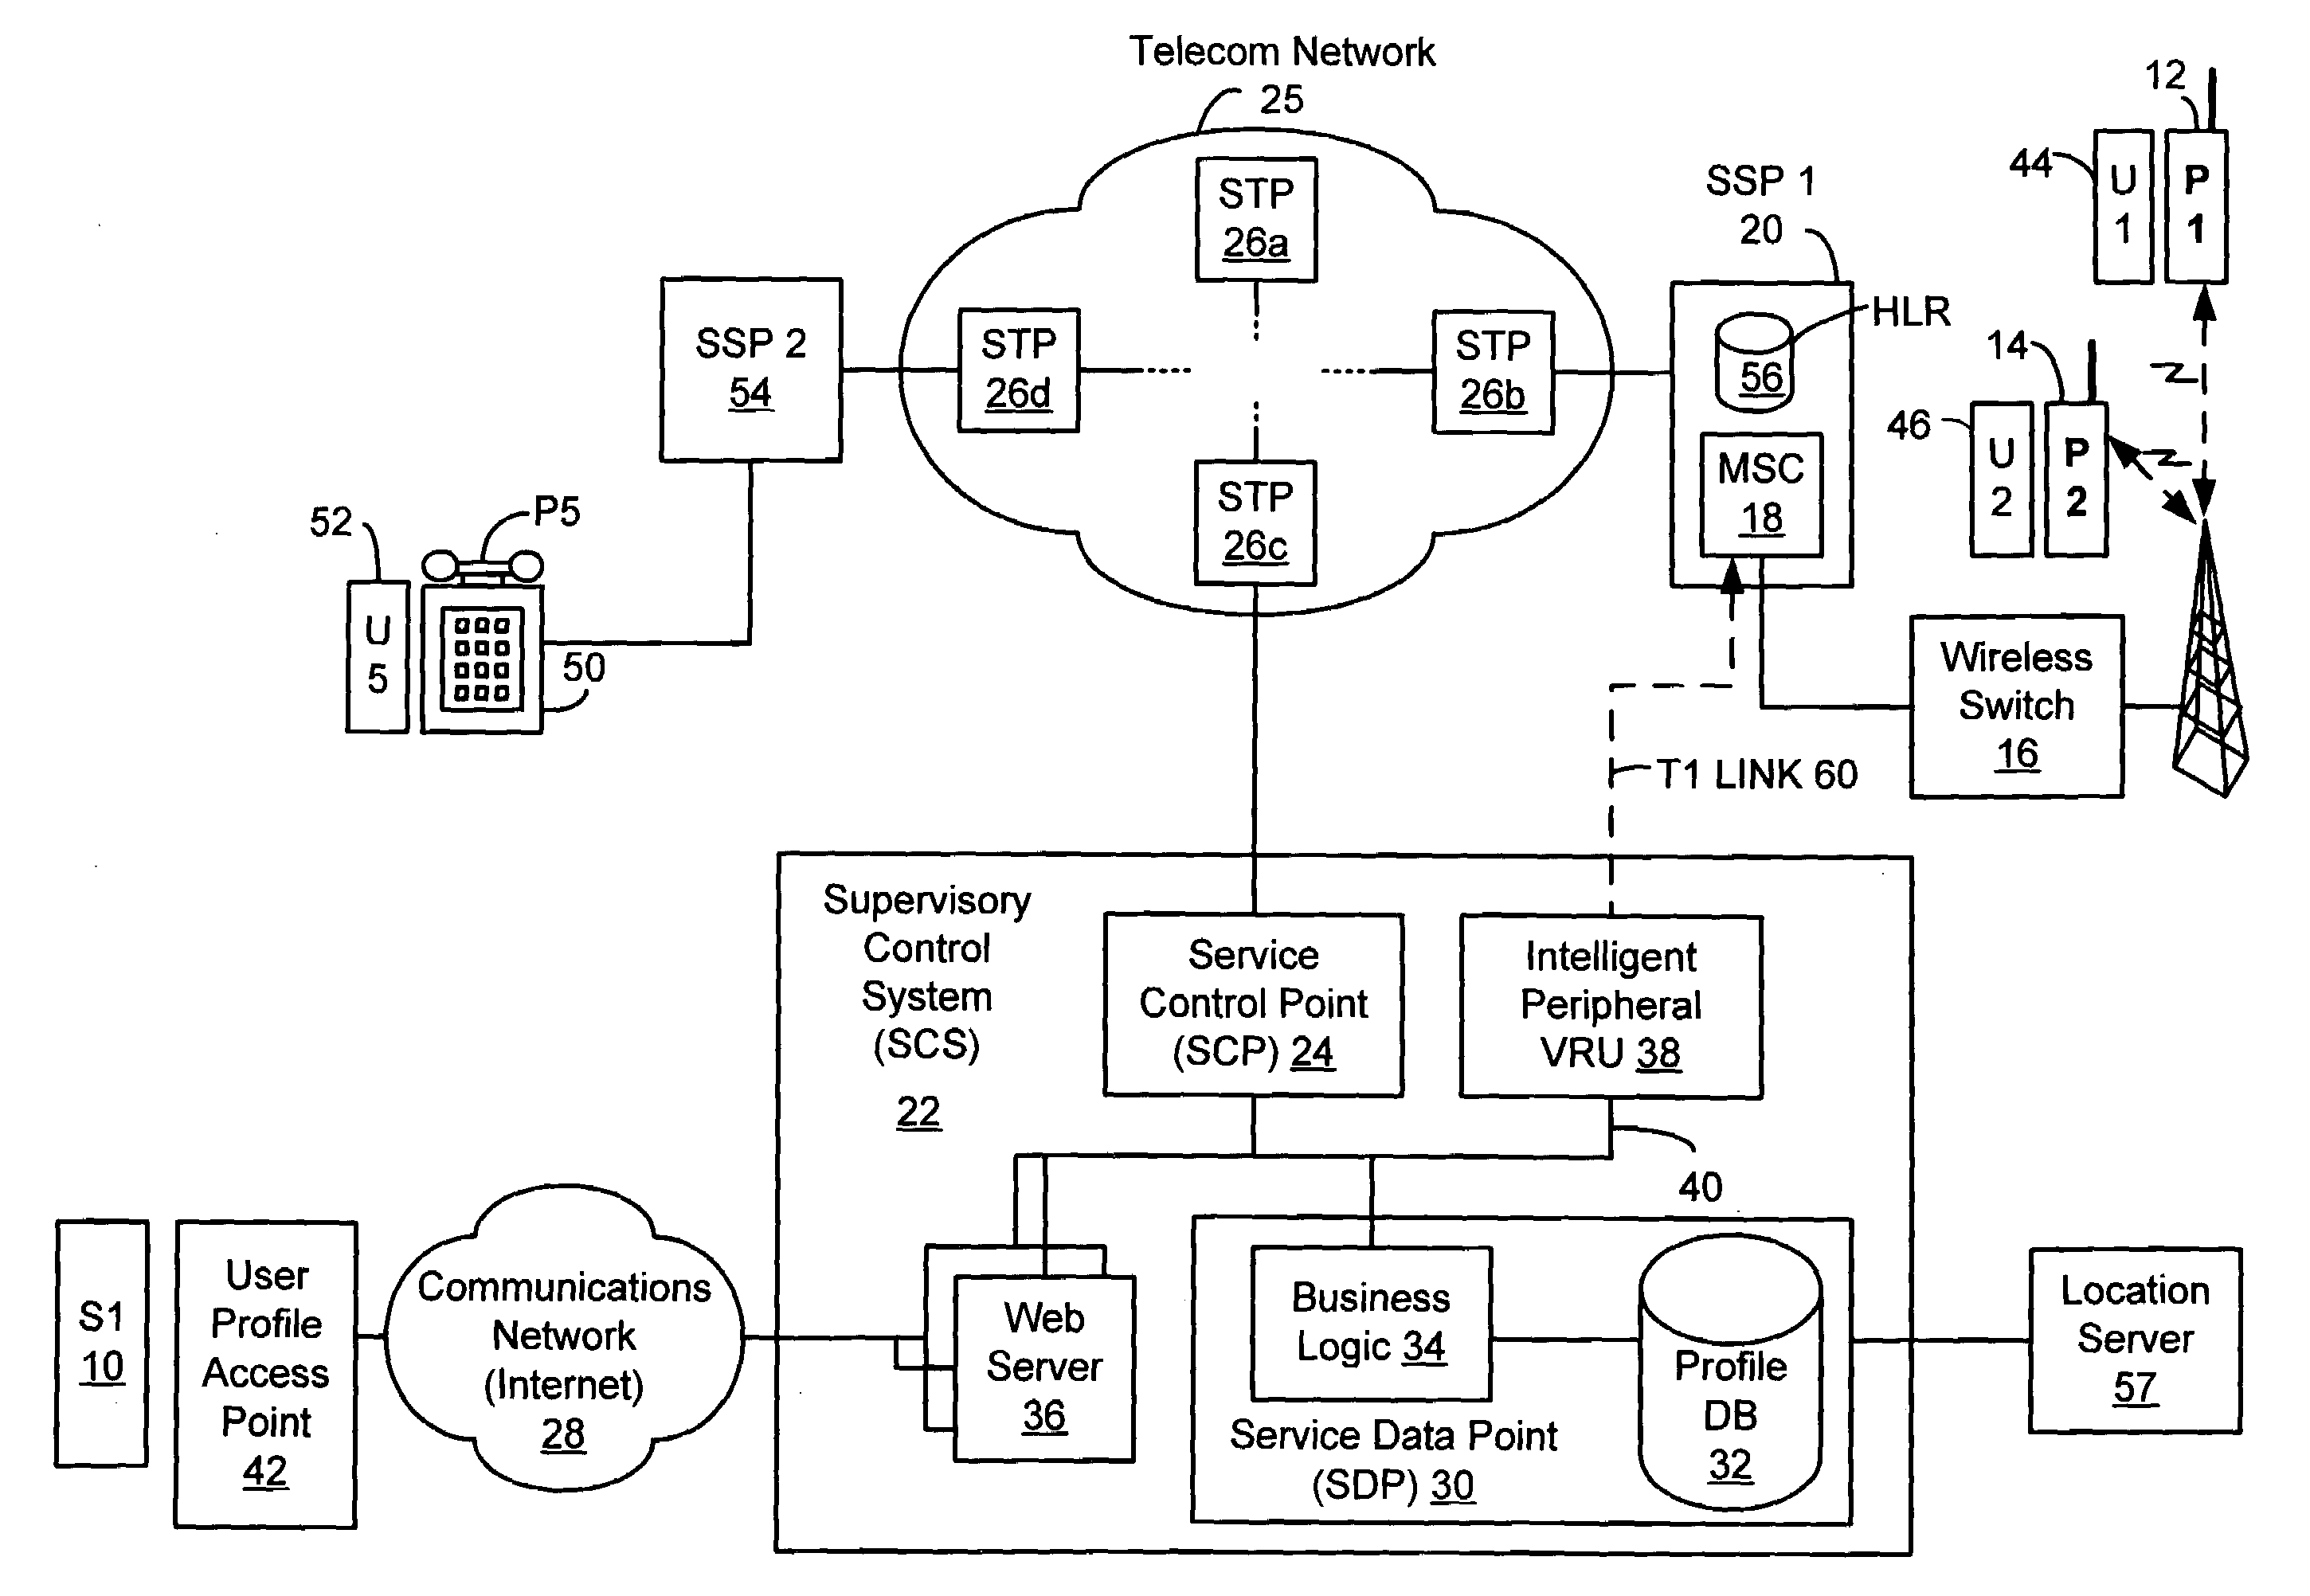 Method and system for providing supervisory control over wireless phone usage